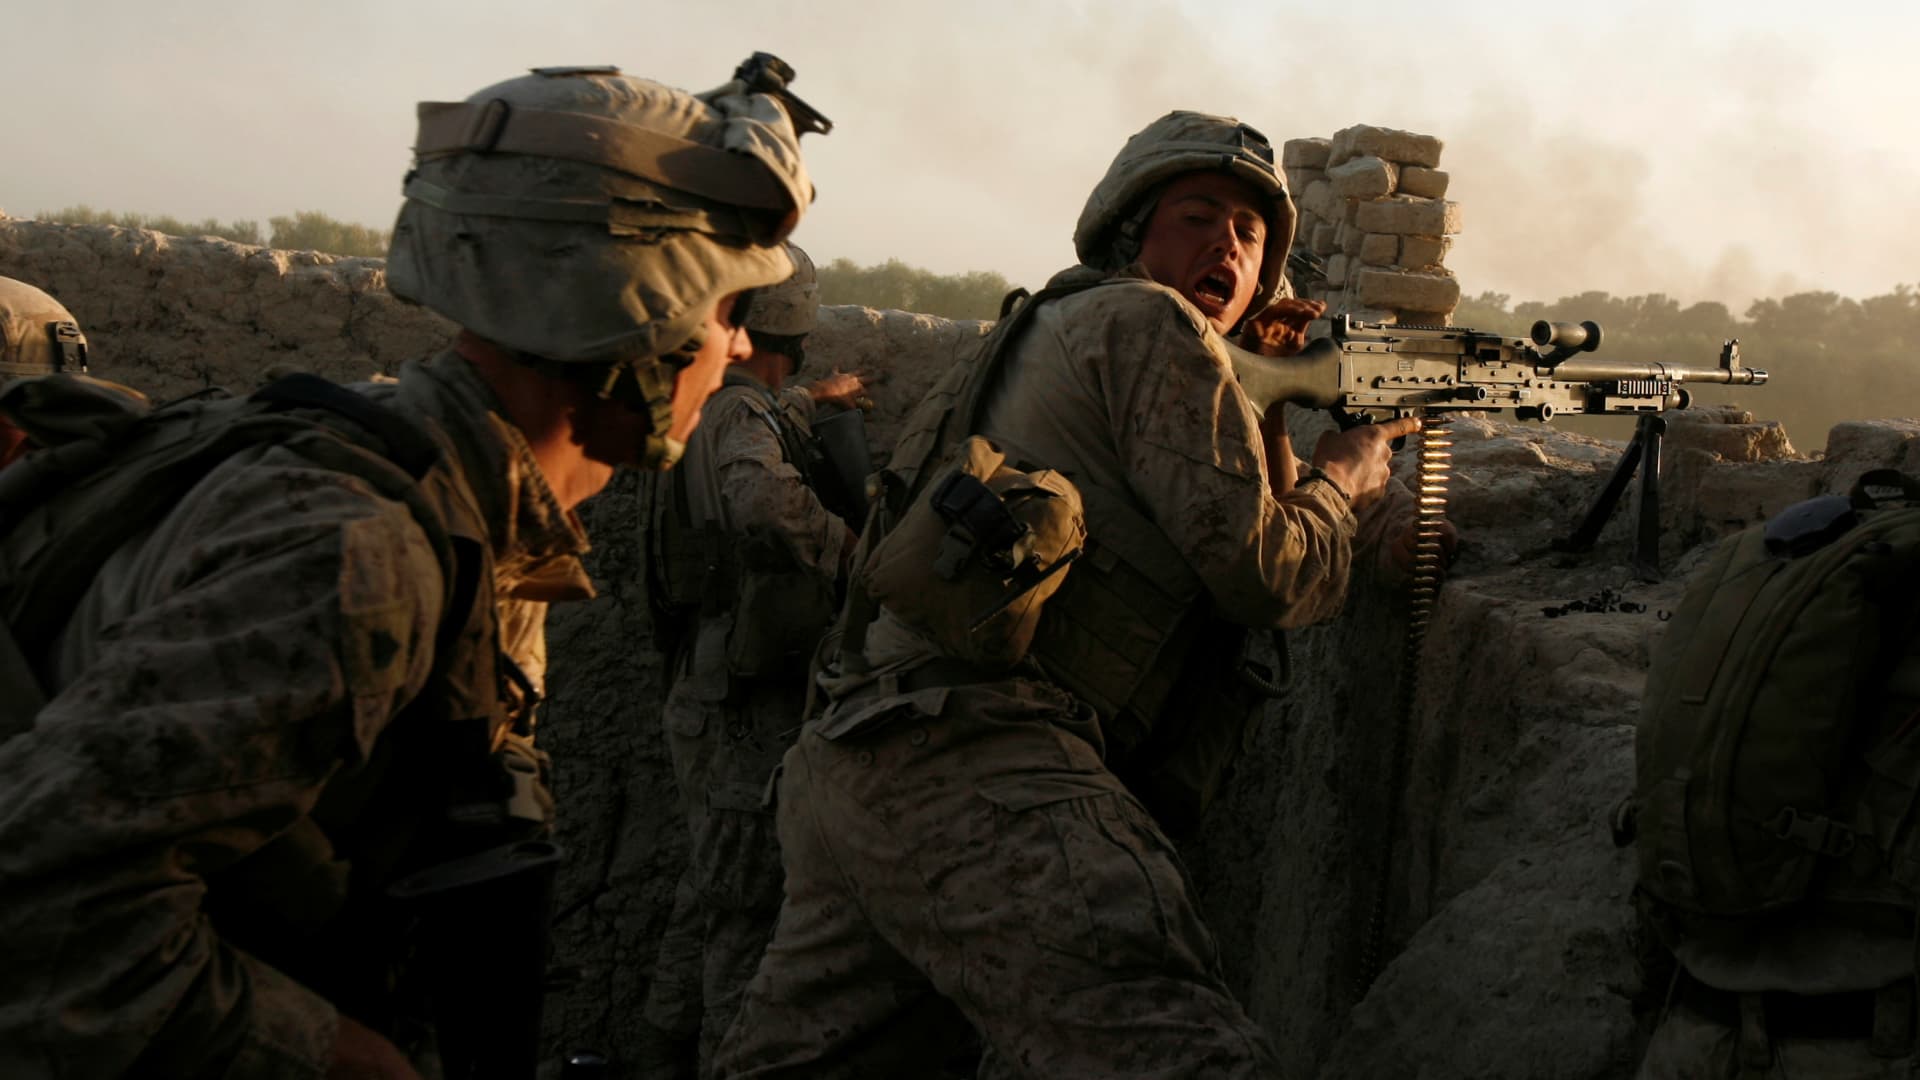 U.S. Marines fire during a Taliban ambush as they carry out an operation to clear an area in Helmand province, Afghanistan, October 9, 2009.